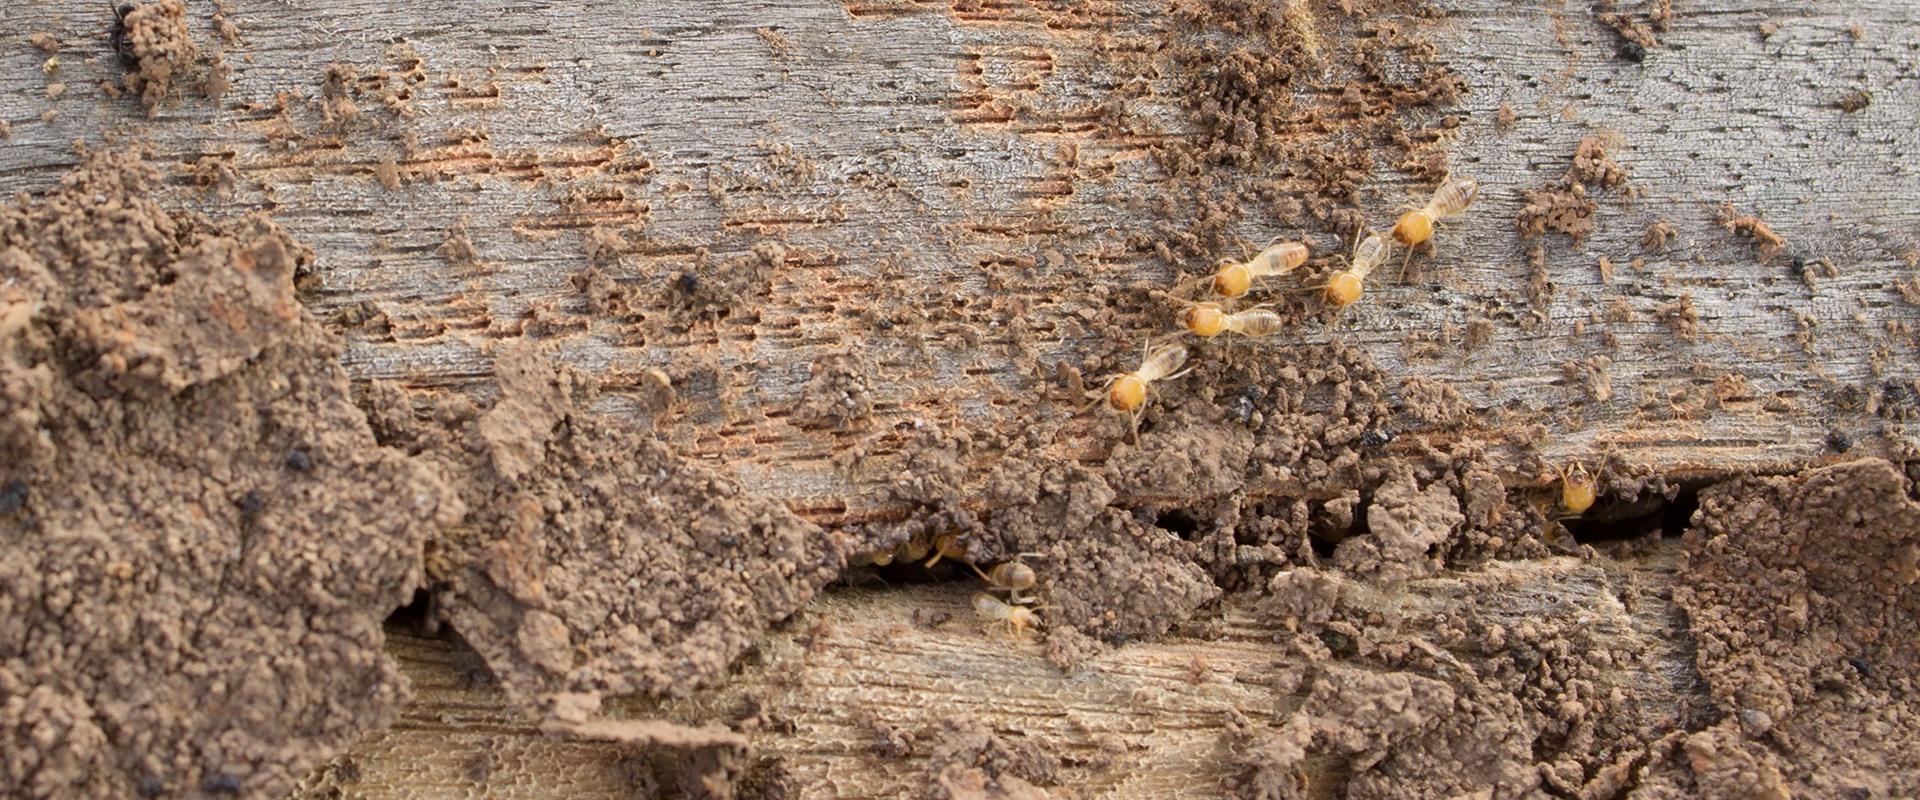 termites burrowing under a house